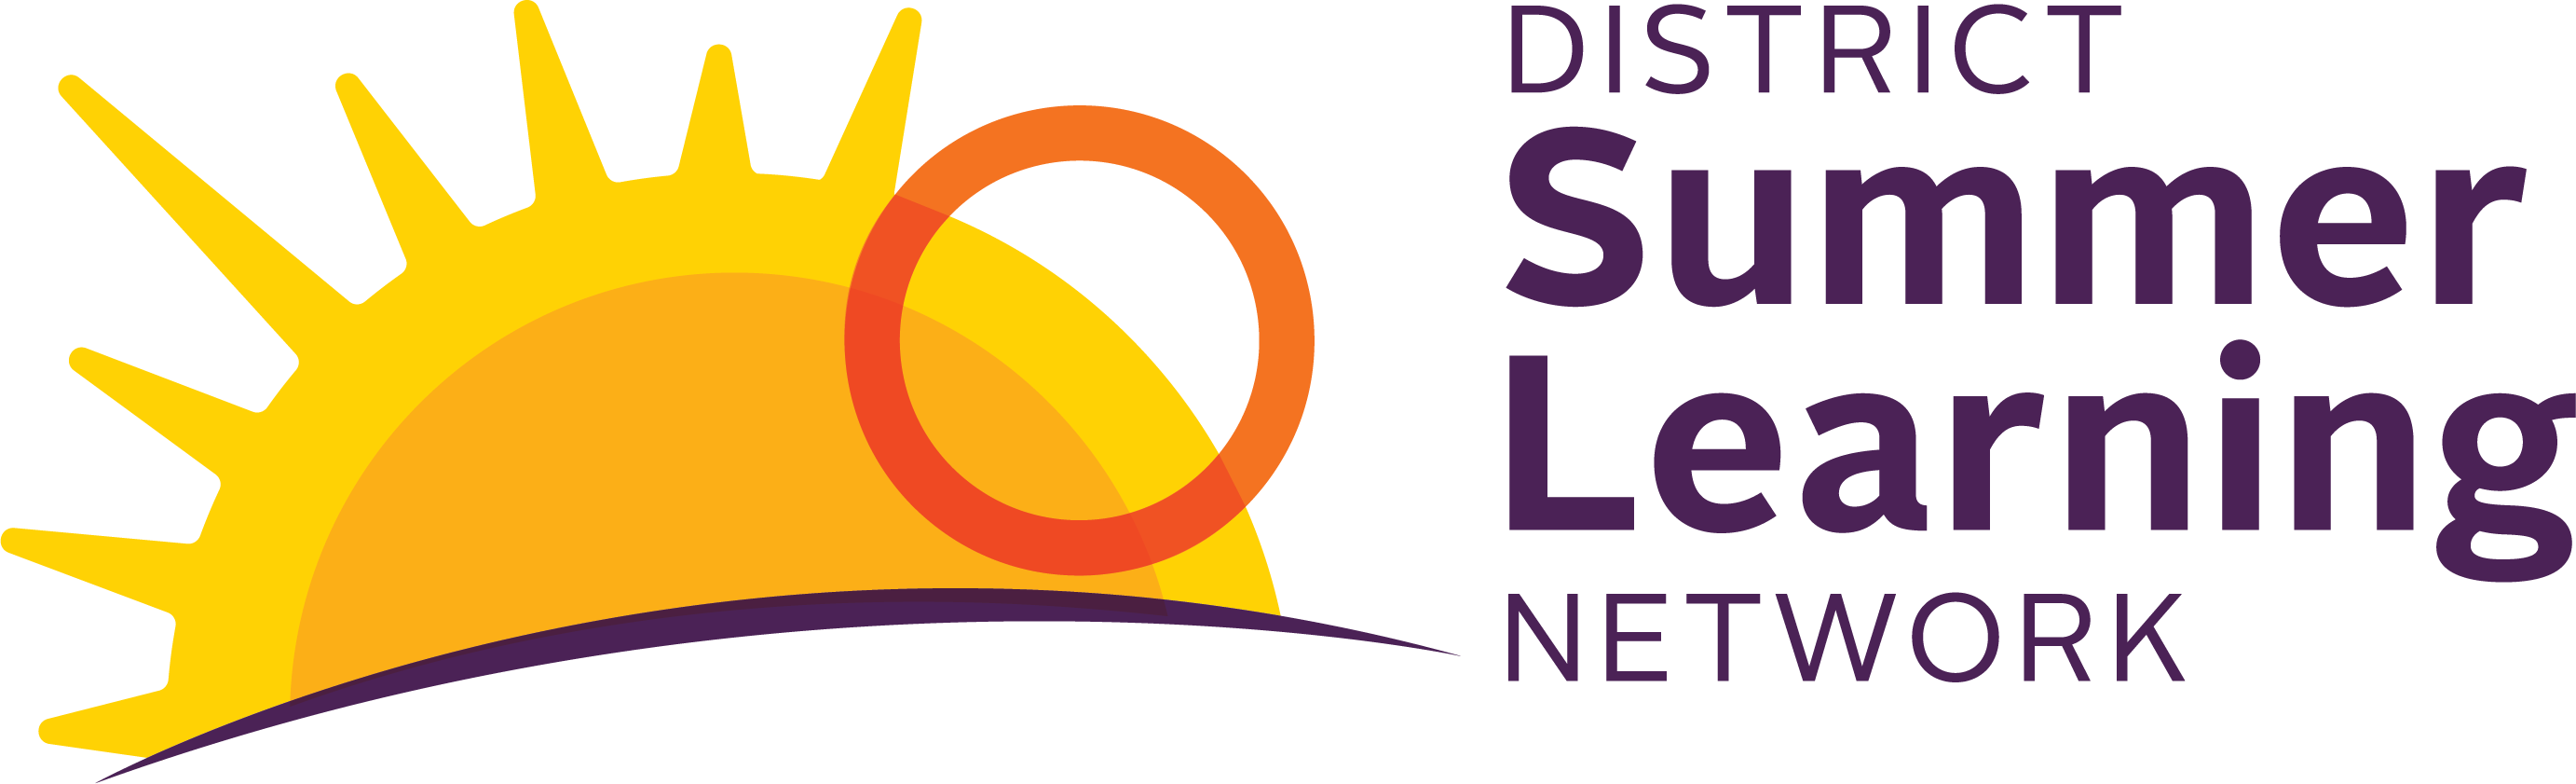 District Summer Learning Network logo